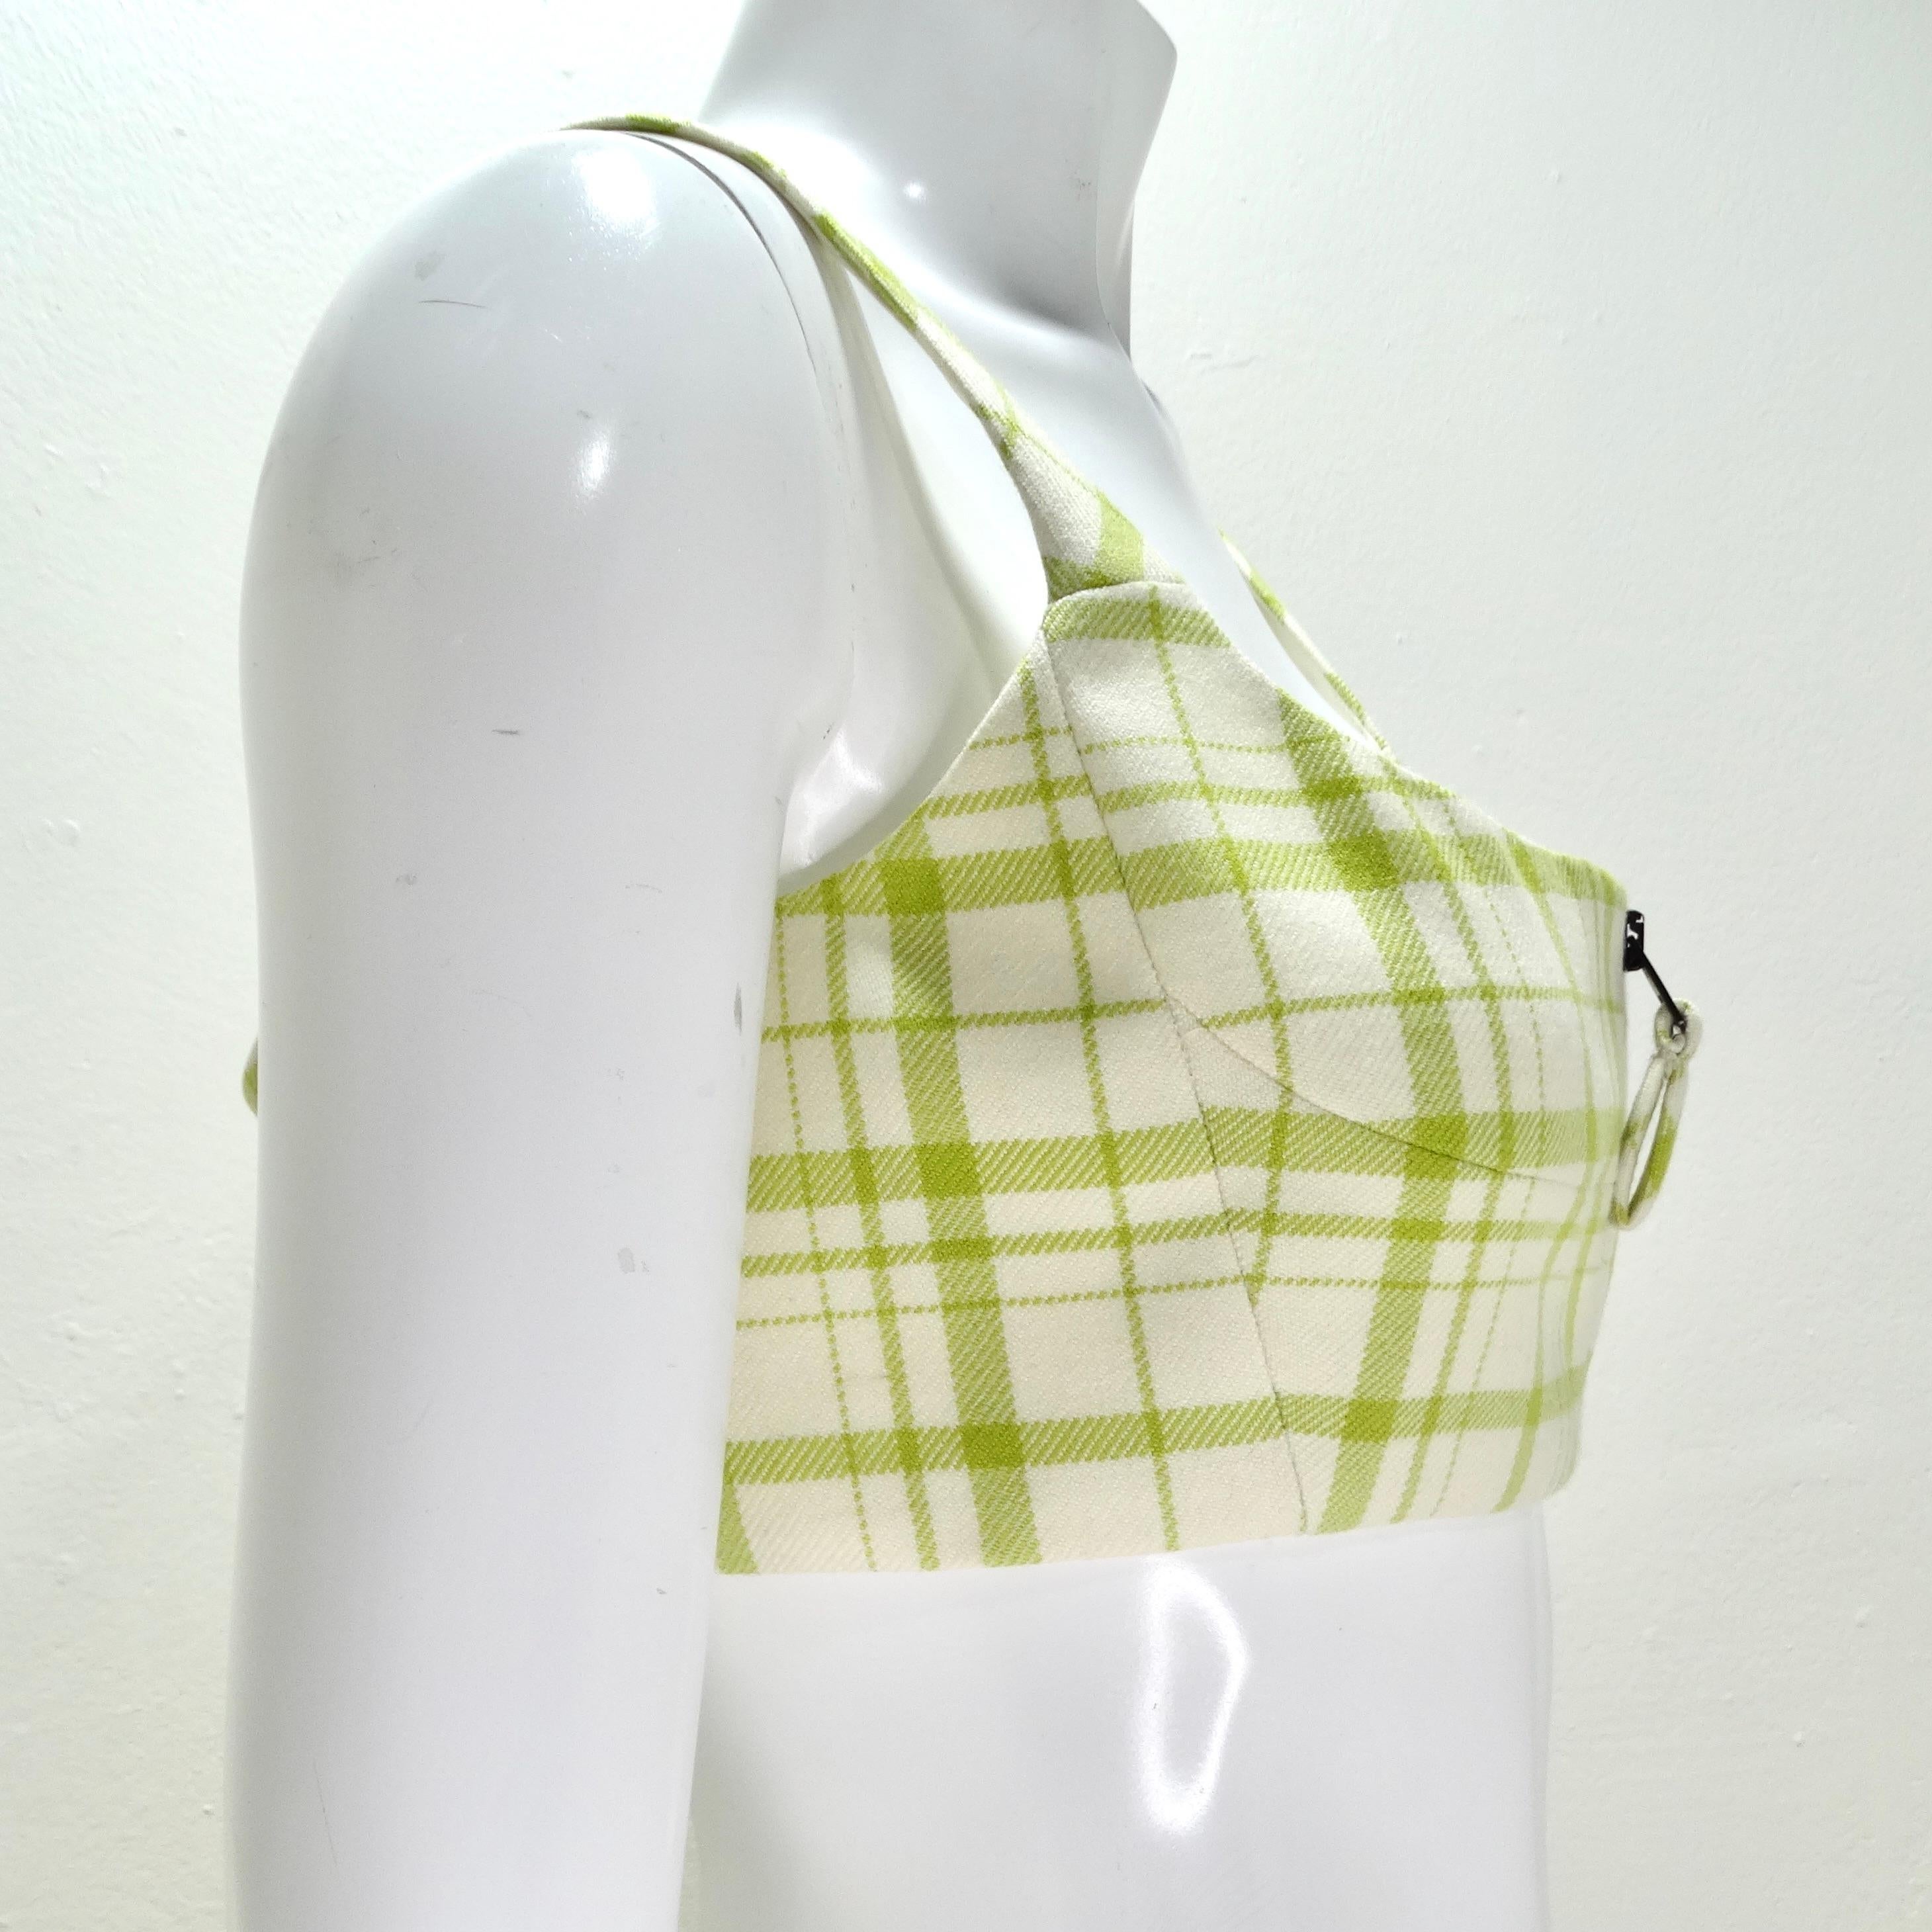 Christian Dior Plaid Wool Crop Top In Excellent Condition For Sale In Scottsdale, AZ